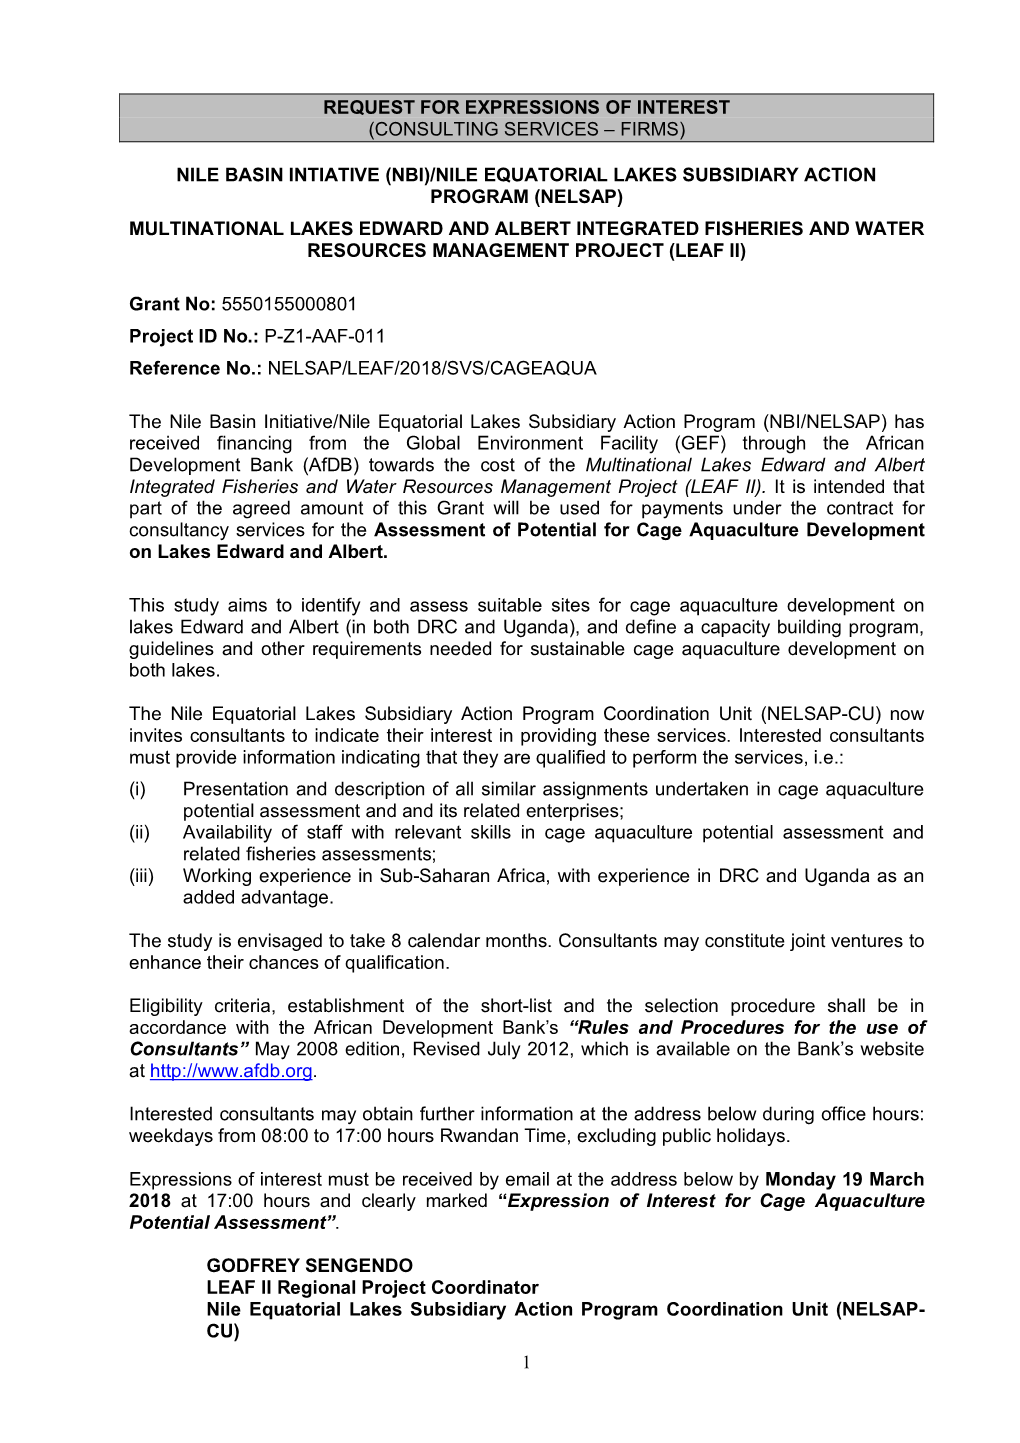 1 Request for Expressions of Interest (Consulting Services – Firms) Nile Basin Intiative (Nbi)/Nile Equatorial Lakes Subsidiar